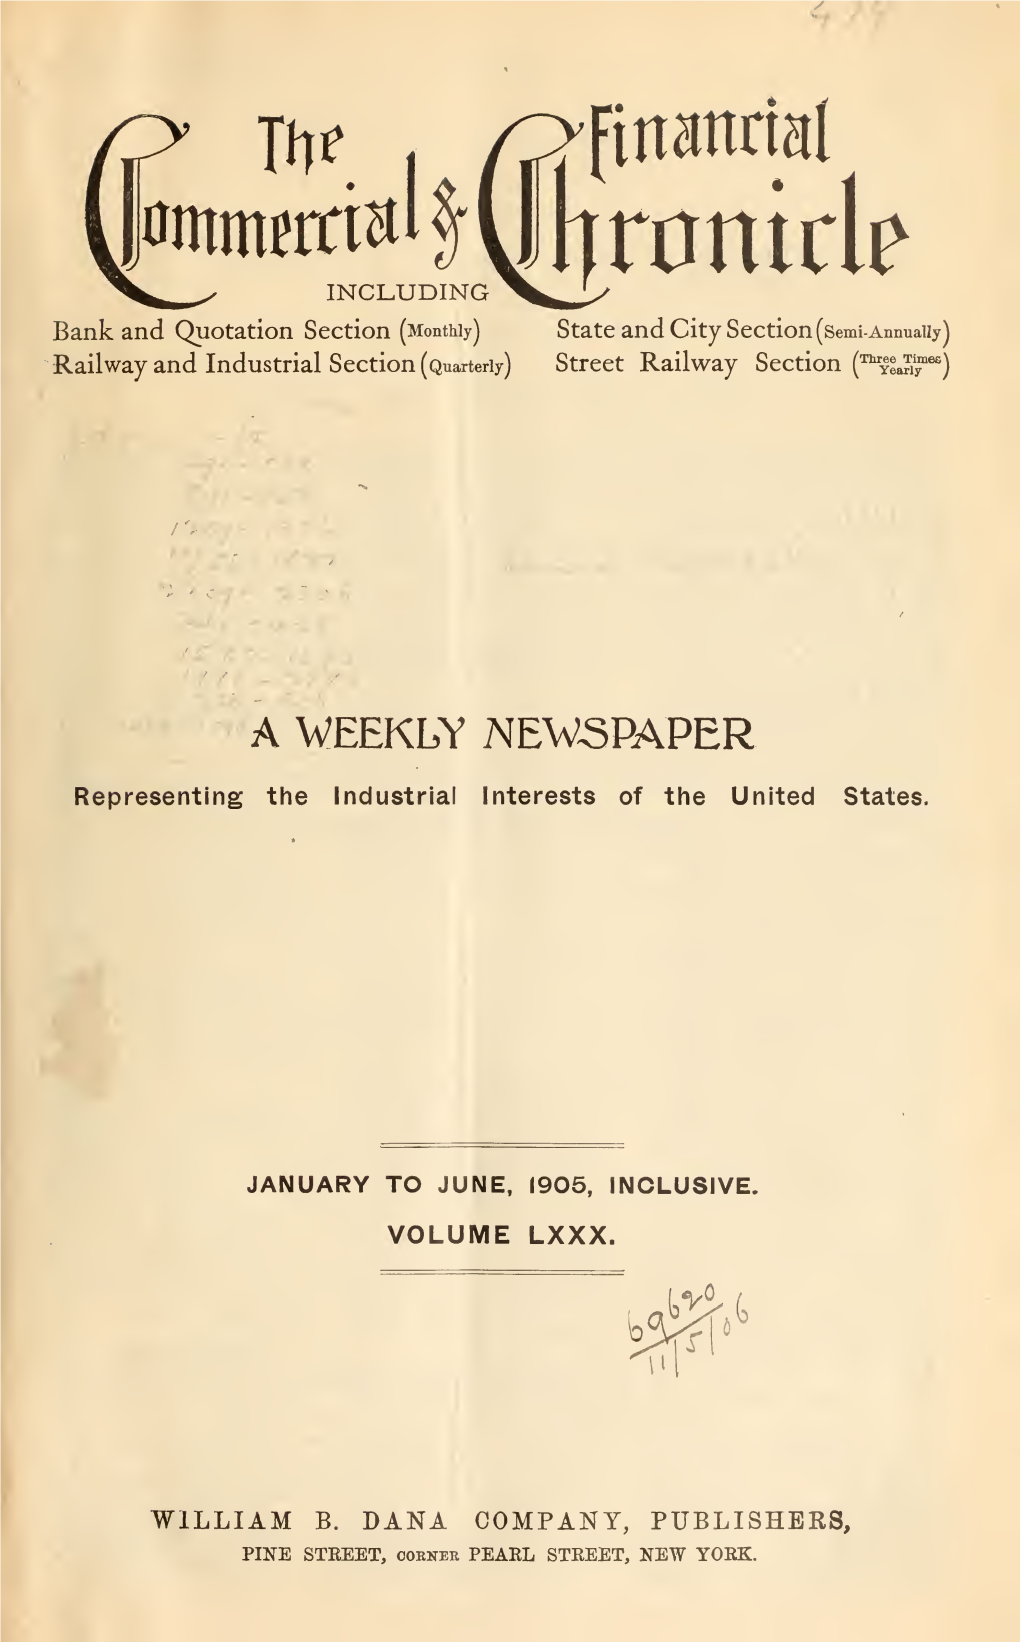 Index to the Eightieth Volume, January 1 to June 30, 1905, Vol. 80